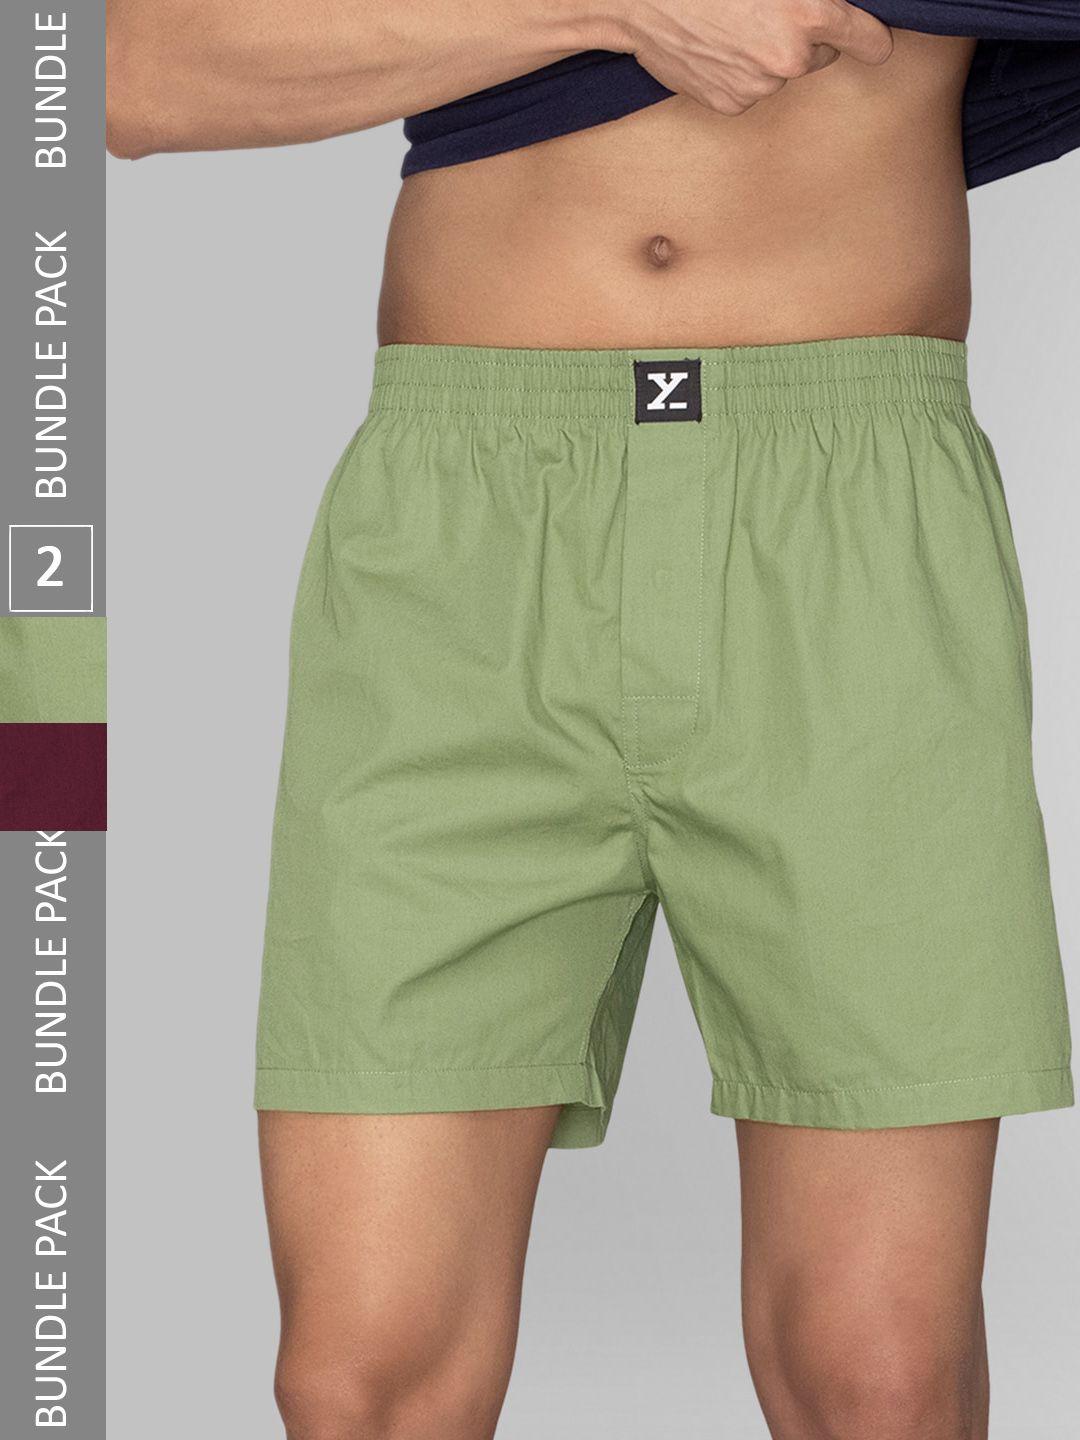 xyxx-men-pack-of-2-cotton-boxers-xybox2pckn342